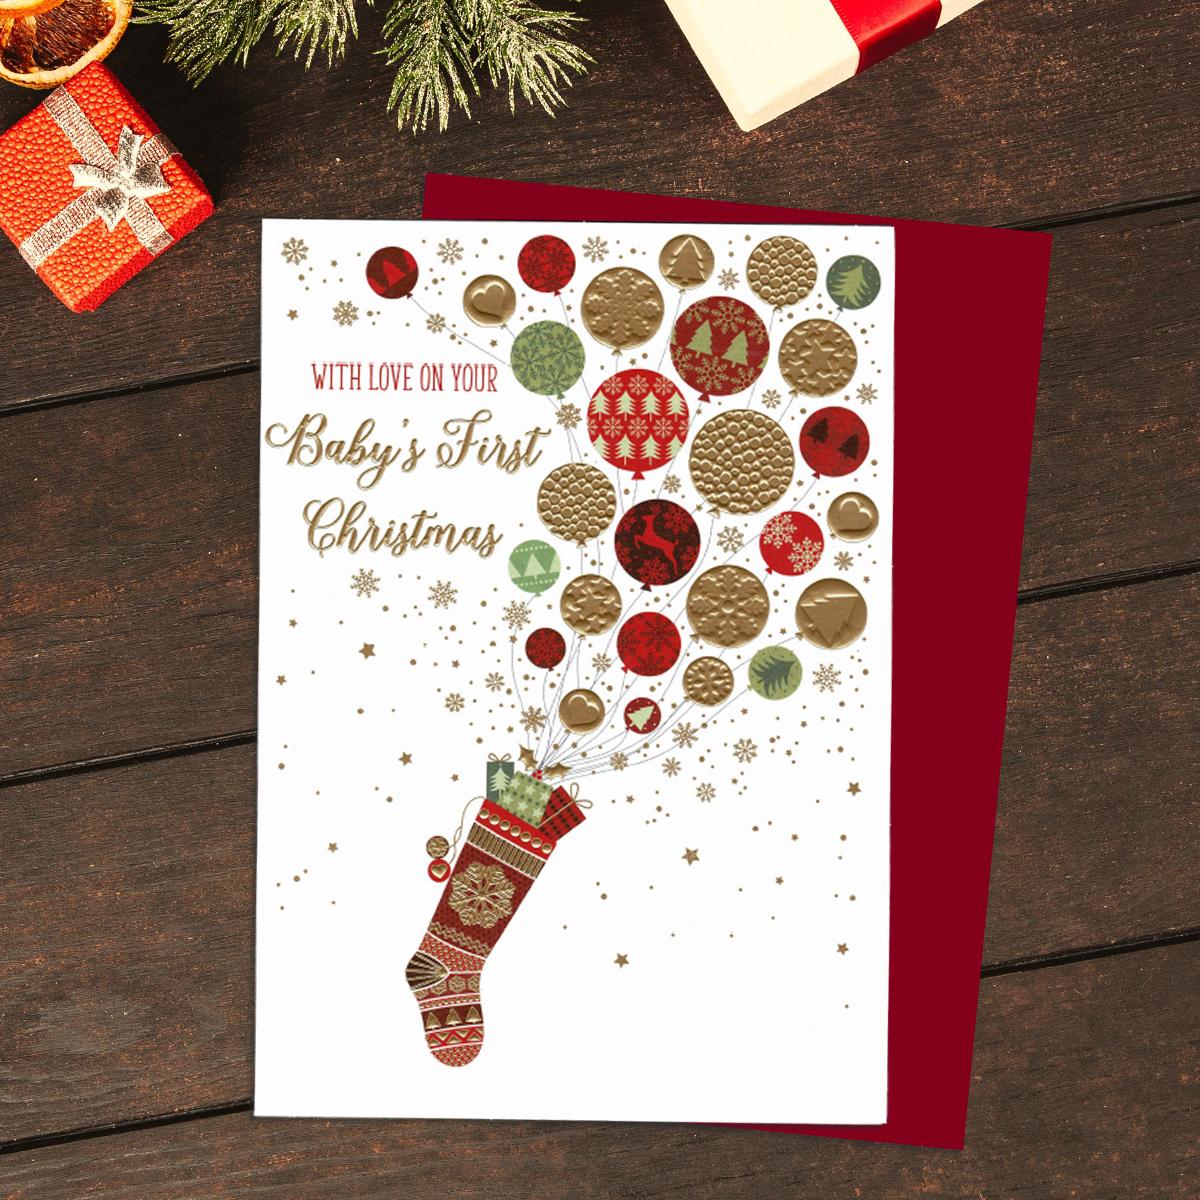 With Love On Baby's First Christmas Card Showing A Christmas Stocking Filled With Balloons. Finished With Gold Foil Lettering And Accents. Completed With a Red Envelope